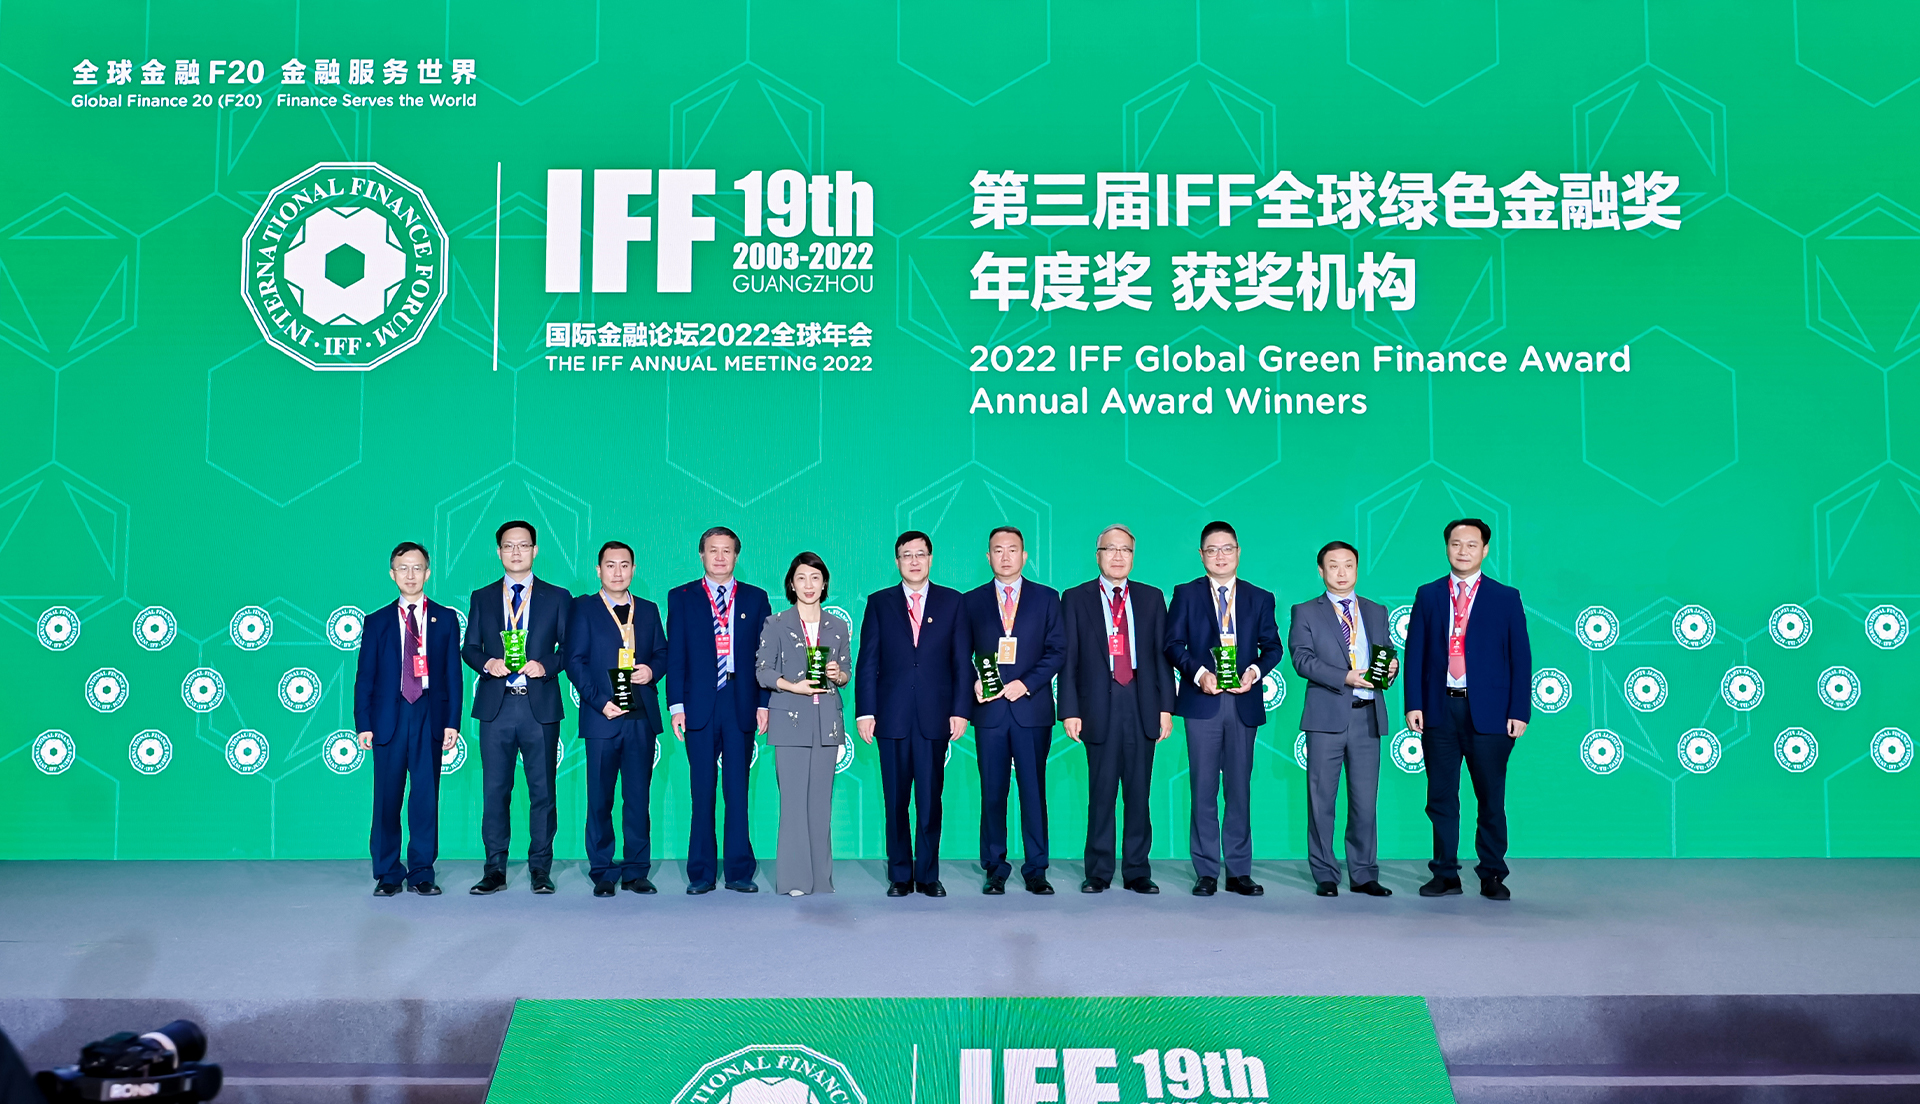 IFF 2022 Annual meeting Banquet and Ceremony for 2022 IFF Global Green Finance Award Annual Award Winners